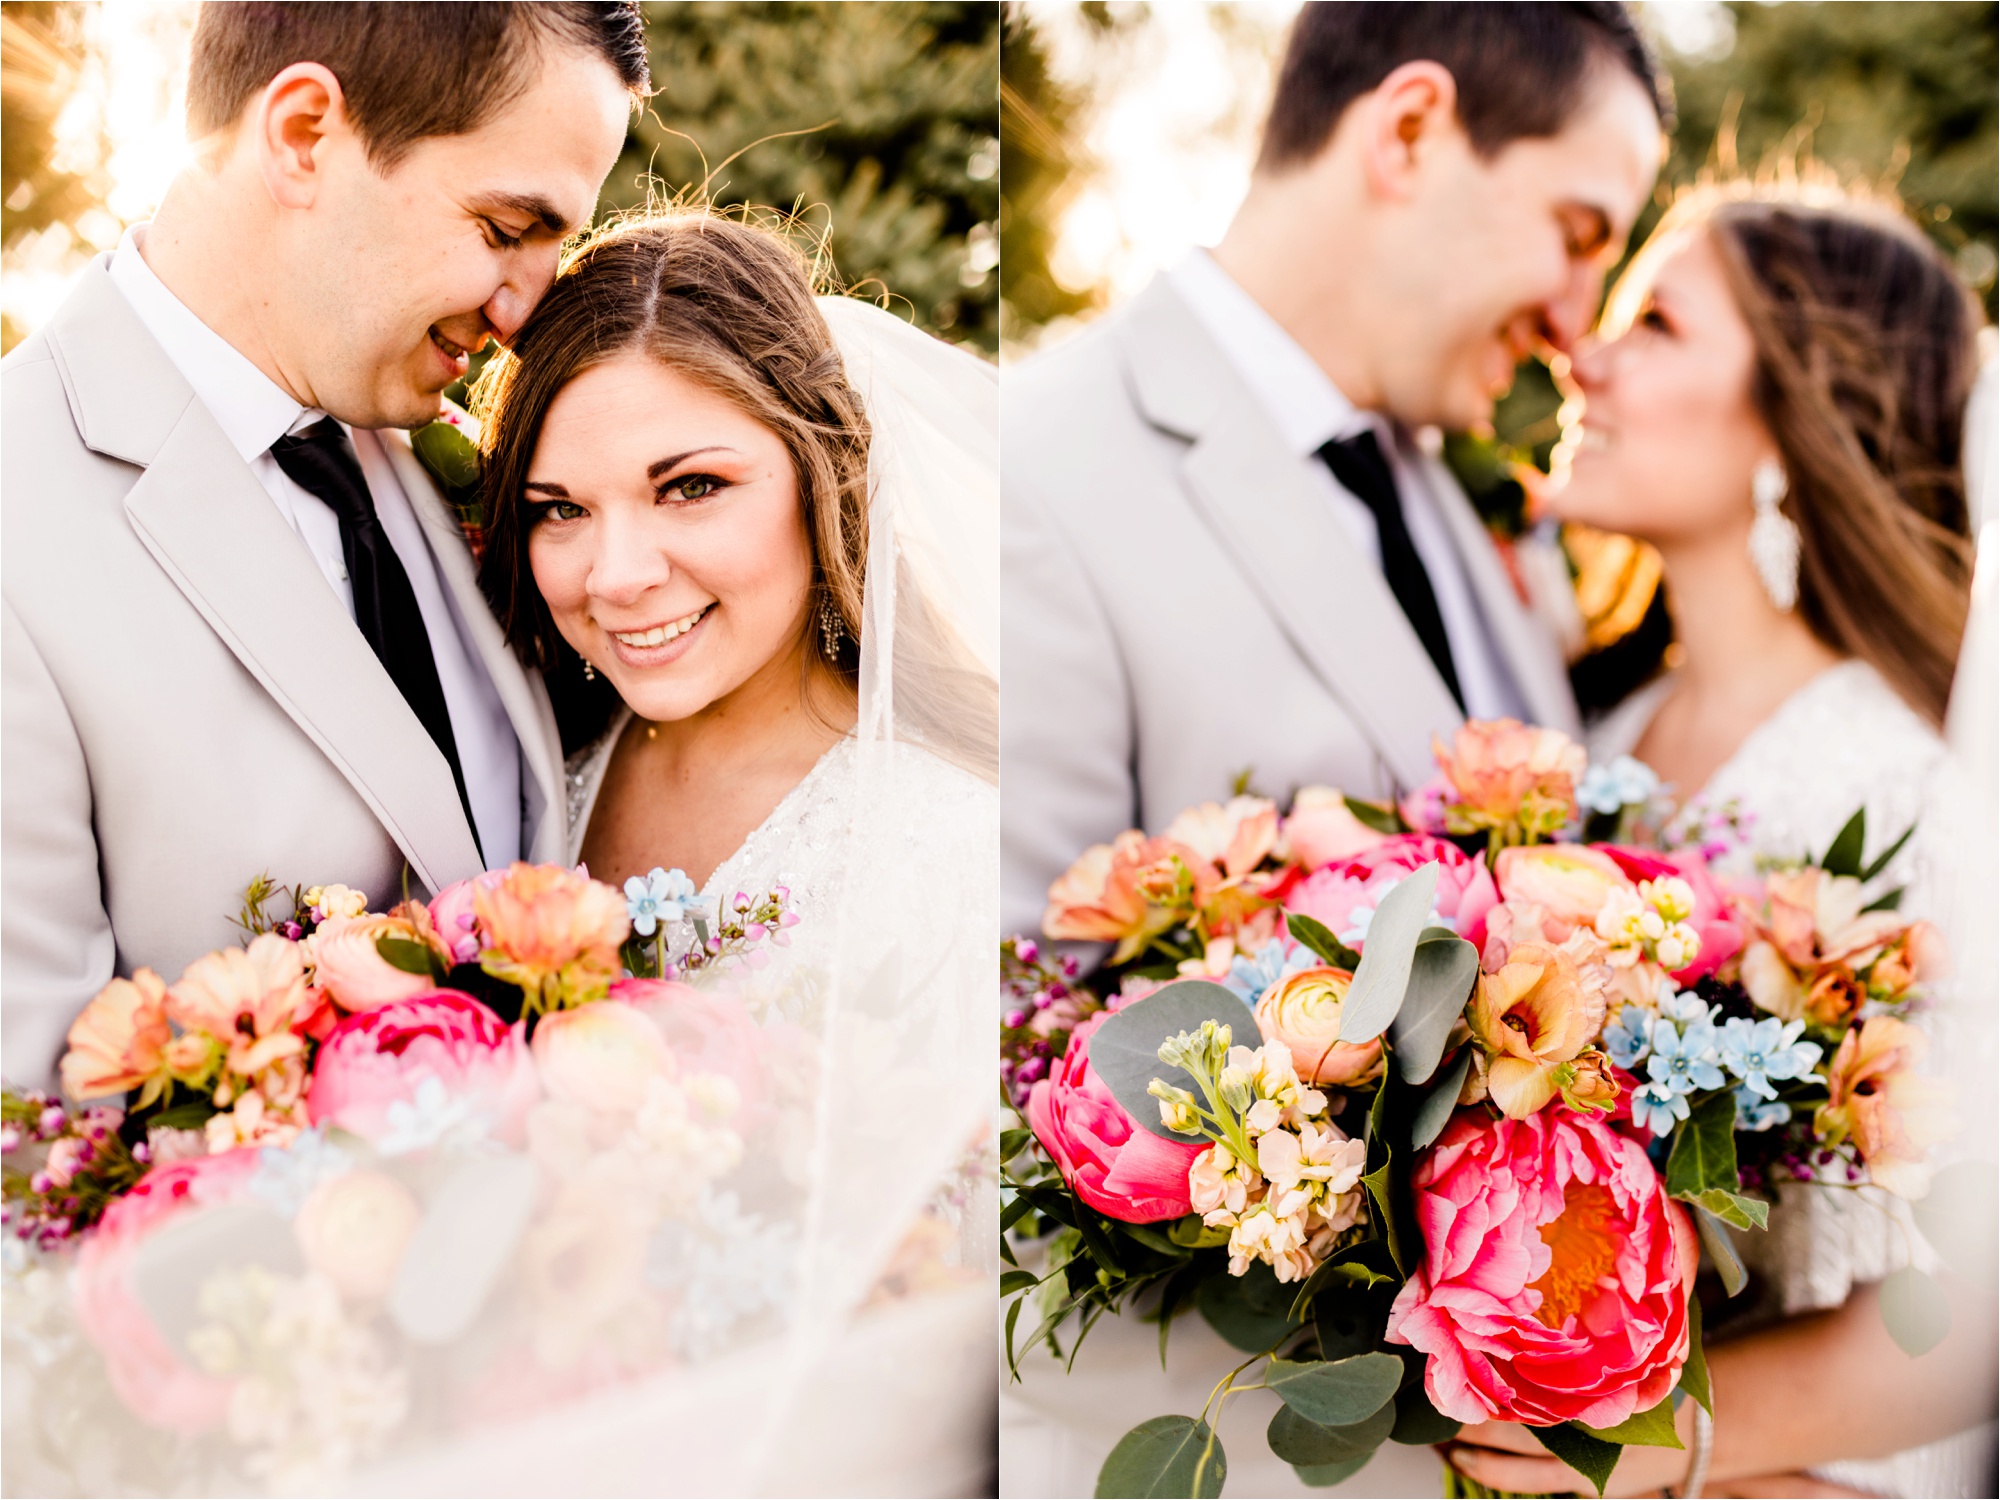 Caitlin and Luke Photography, Illinois Wedding Photographers, Champaign Wedding Photographers, Bloomington Normal Wedding Photographers, Romantic Red and Pink Sunset Styled Shoot_9548.jpg